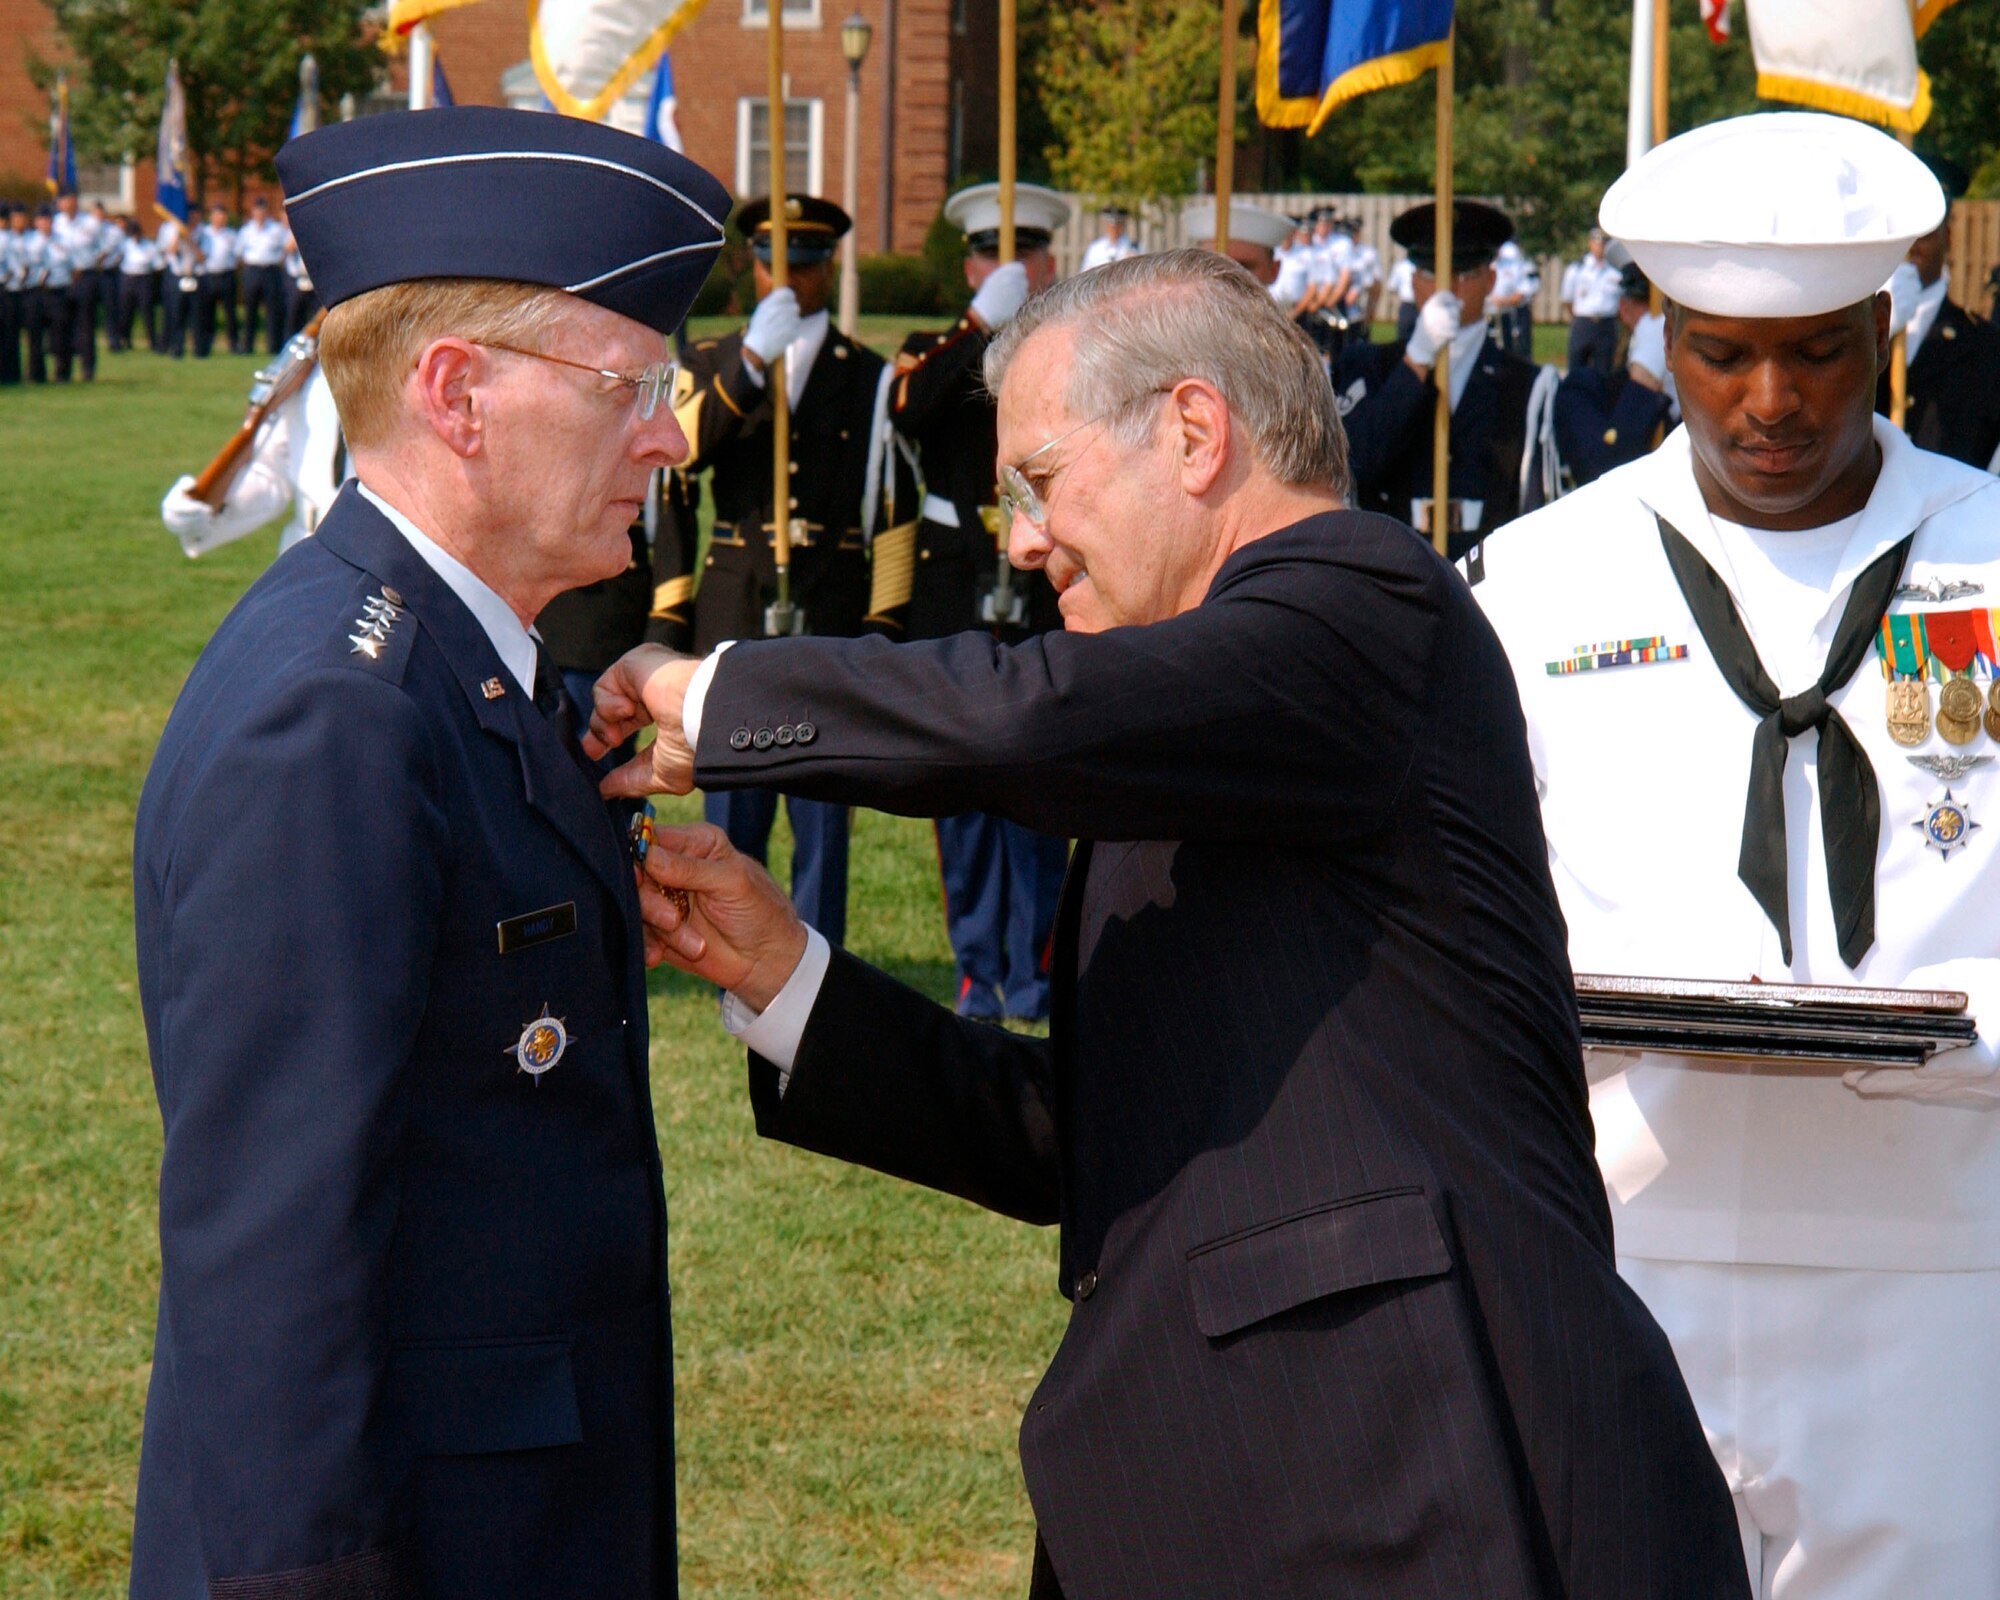 SCOTT AIR FORCE BASE, Ill -- Defense Secretary Donald H. Rumsfeld pins the Distinguished Service Medal on outgoing U.S. Transportation Command commander Gen. John W. Handy during the TRANSCOM change of command ceremony here Sept. 7.  Gen. Norton A. Schwartz assumed command.  (U.S. Air Force photo by Senior Airman David Clark)